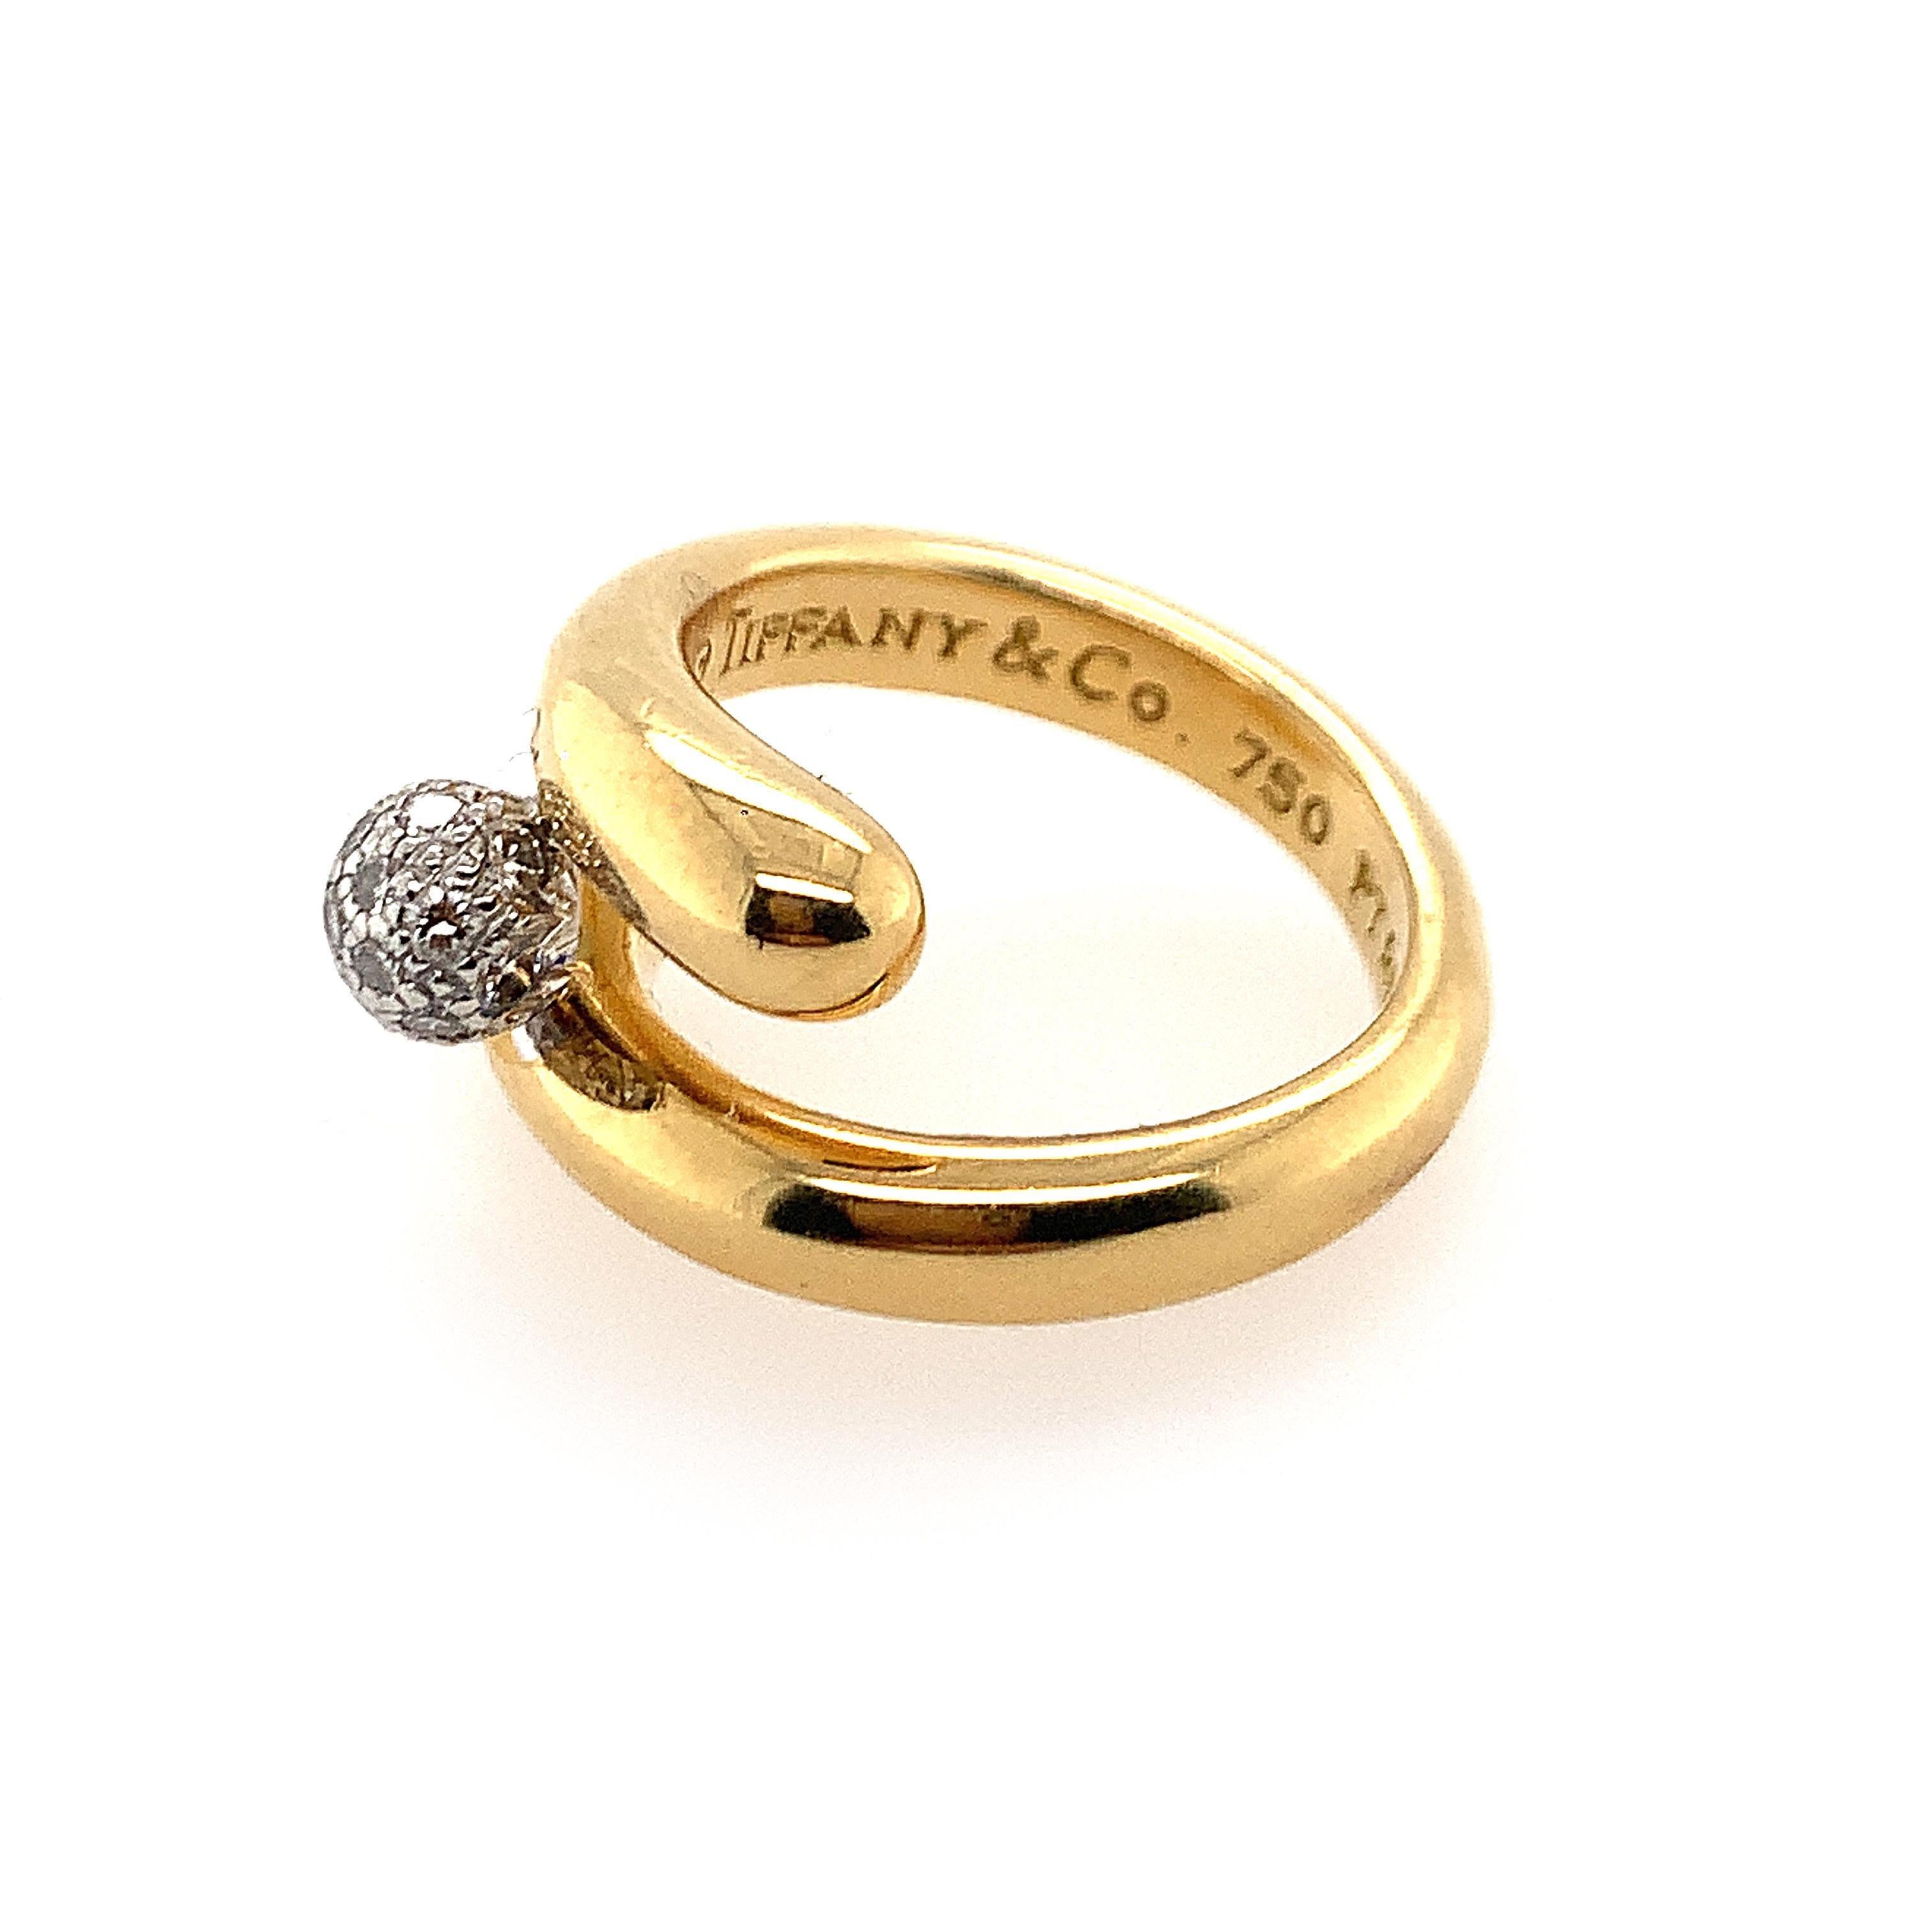 Tiffany & Co. Platinum 18K Y/gold diamond ring with diamond center weighing approx. 0.25 ct, ring size 6 1/4, weight 8.9 dwt.